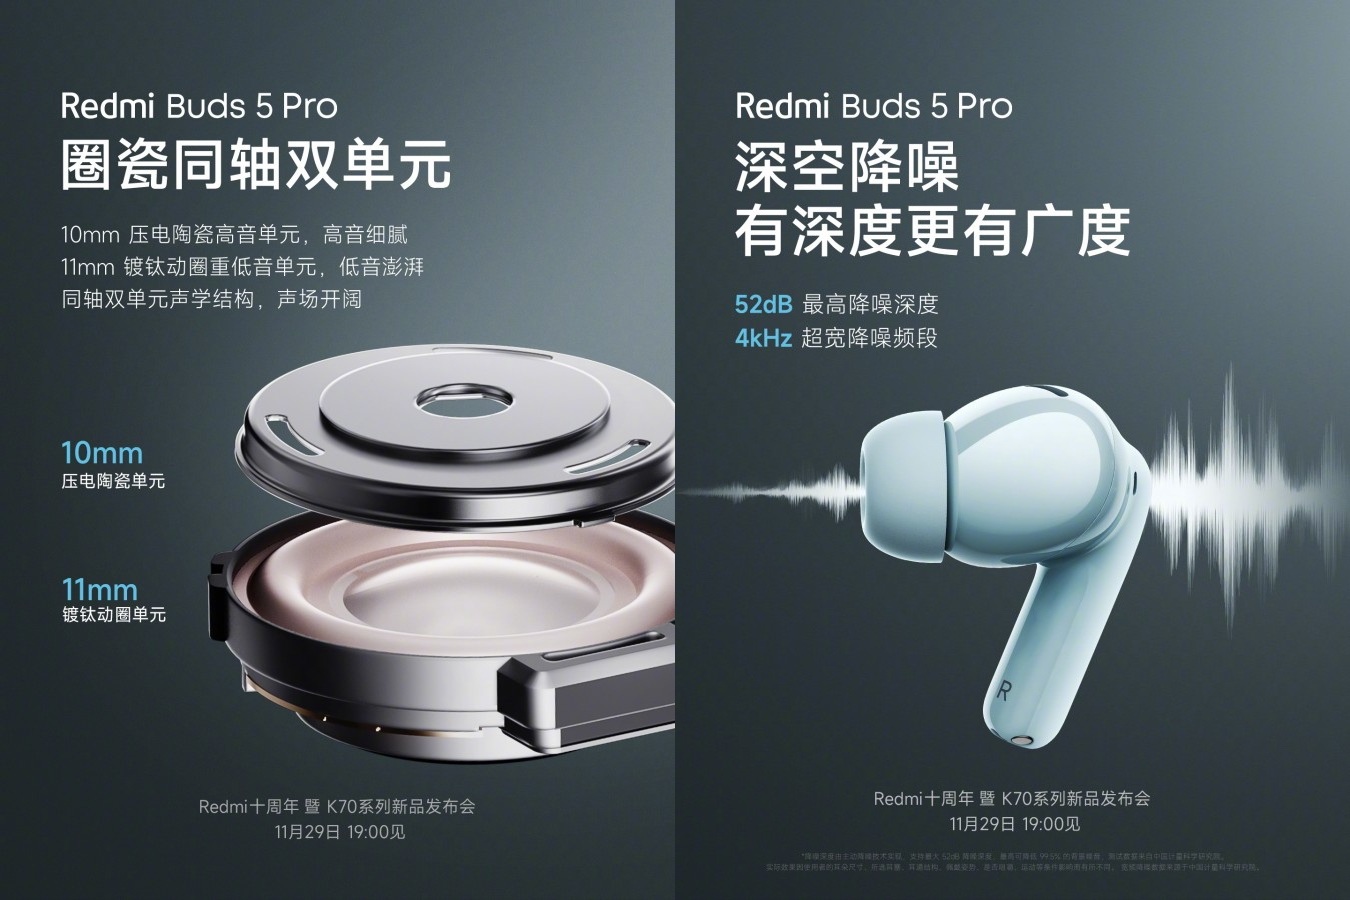 Xiaomi has unveiled the Redmi Buds 5 Pro headphones priced from $55 that  can run for 10 hours without a charge